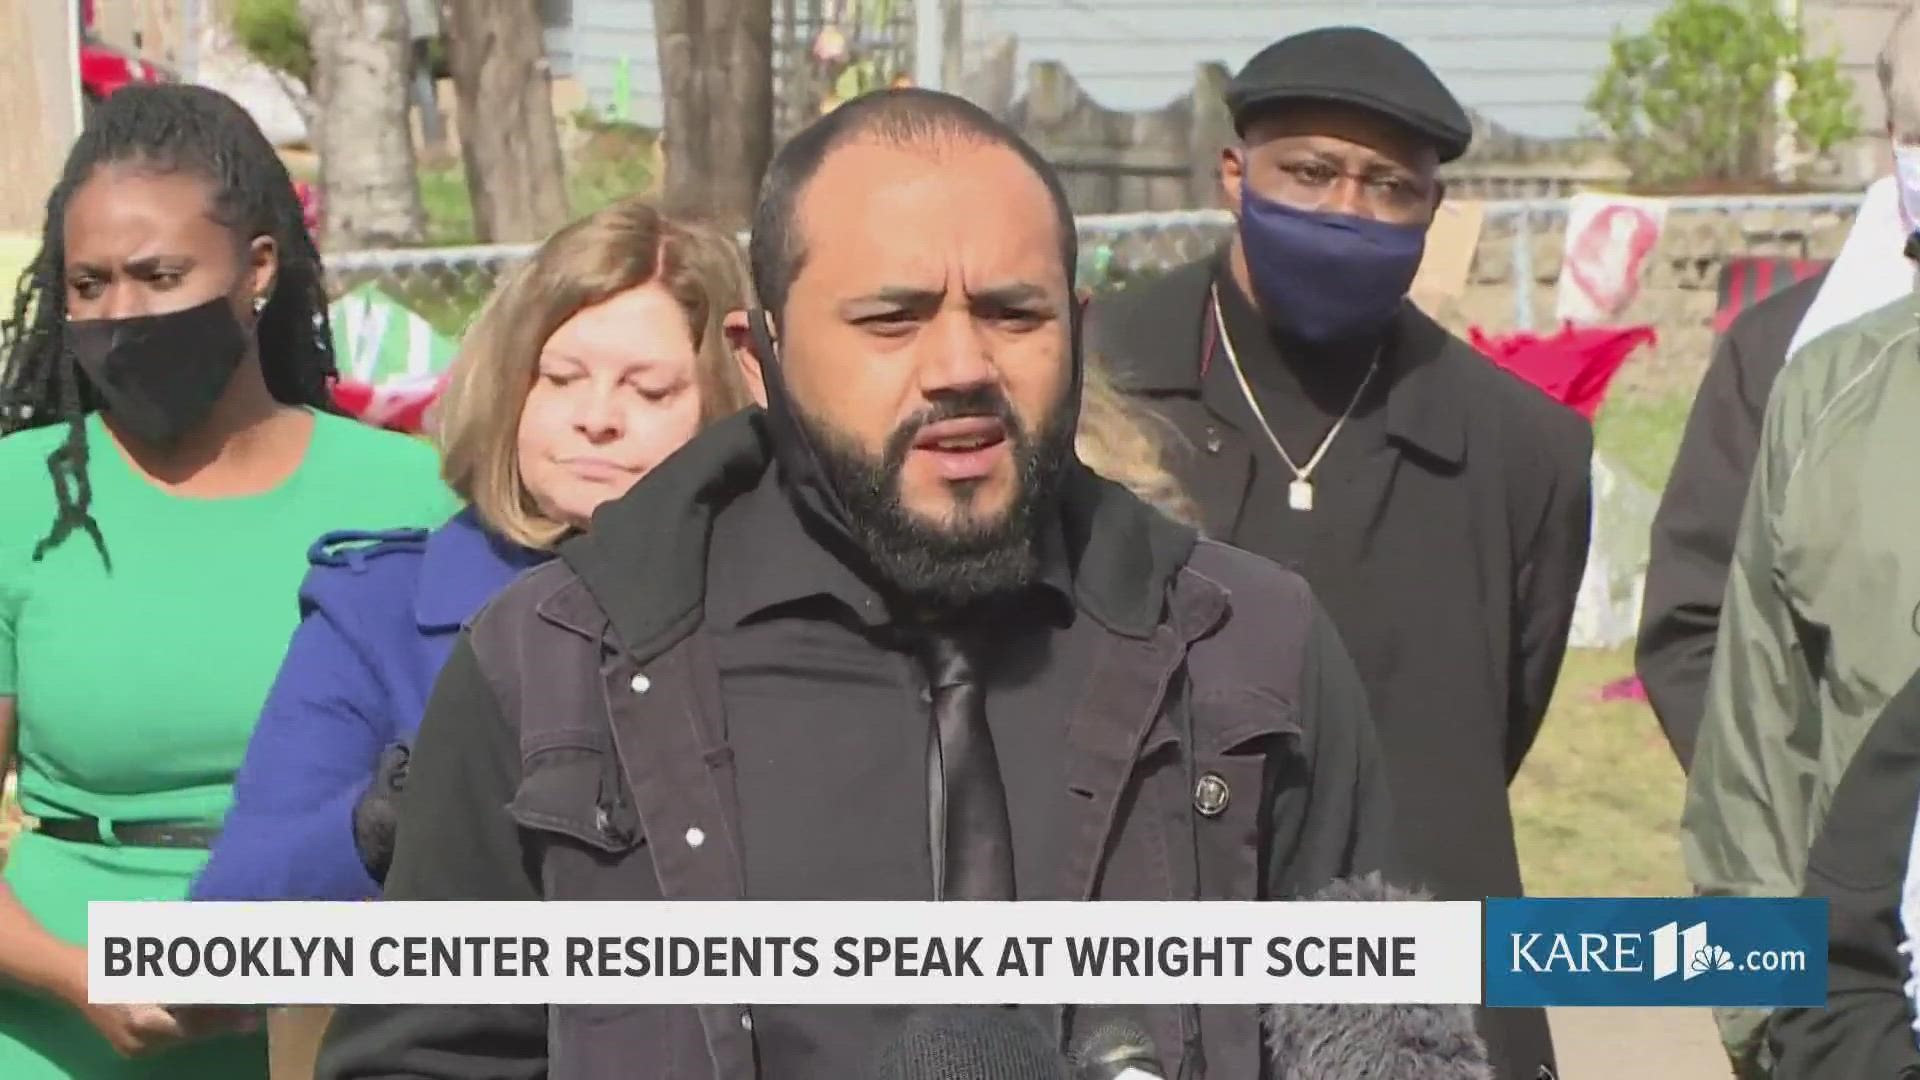 Members of the Brooklyn Center community held a briefing with Mayor Mike Elliott and Rep. Ilhan Omar at the site where Daunte Wright was fatally shot by police.